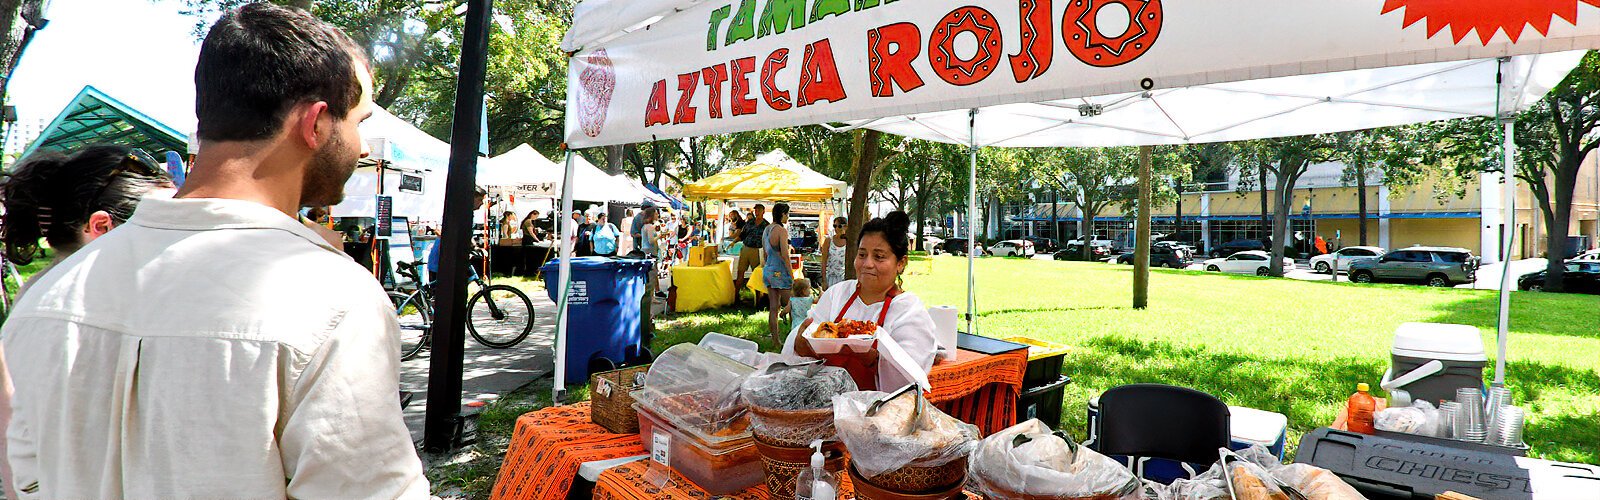 A couple gets an order of authentic Mexican food with a smile from Roci Mendez, the owner and chef of Azteca Rojo, which specializes in handmade tamales.